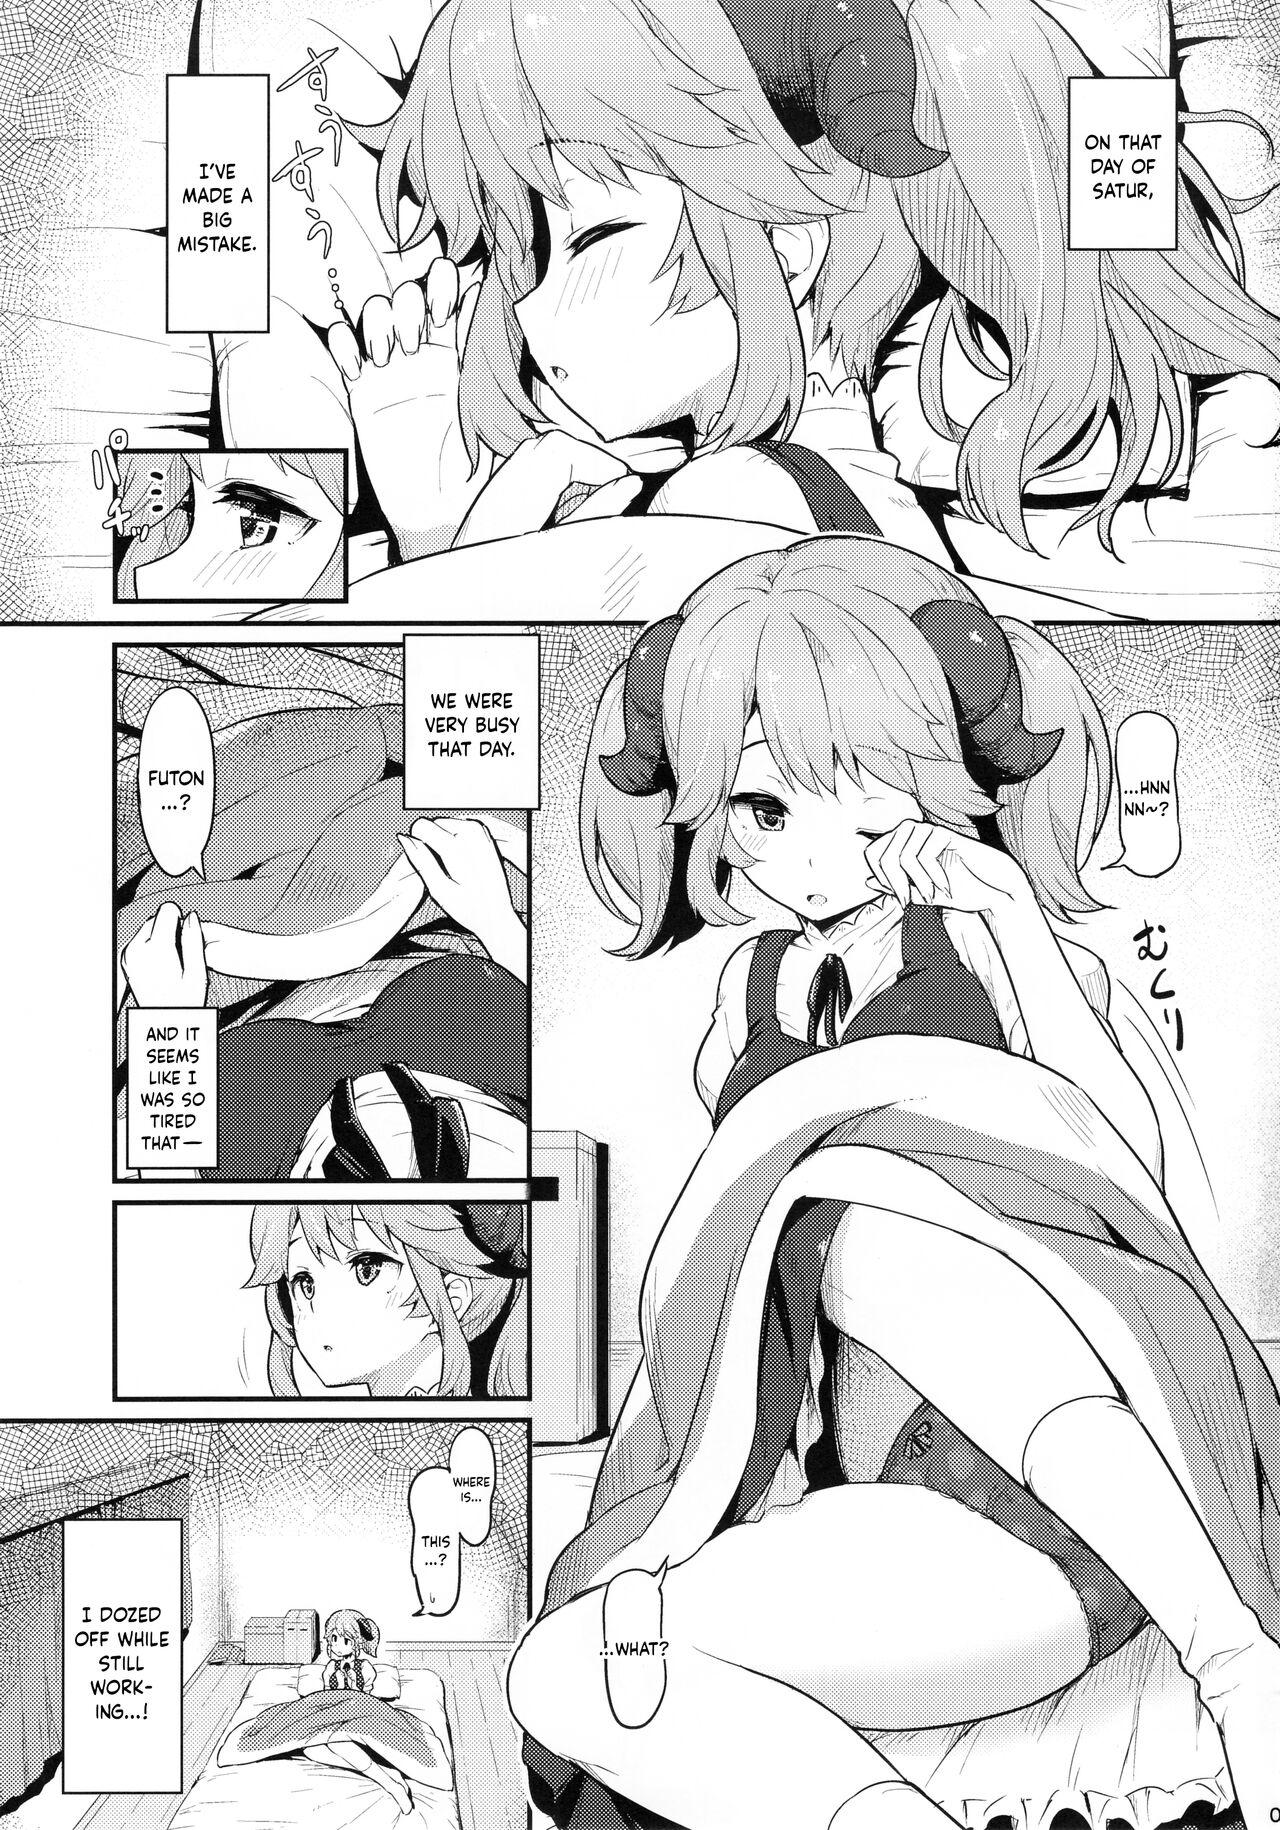 Pija Toaru Doyou no Hi | On a Certain Day of Satur - Isekai shokudou | restaurant to another world Oral - Page 2